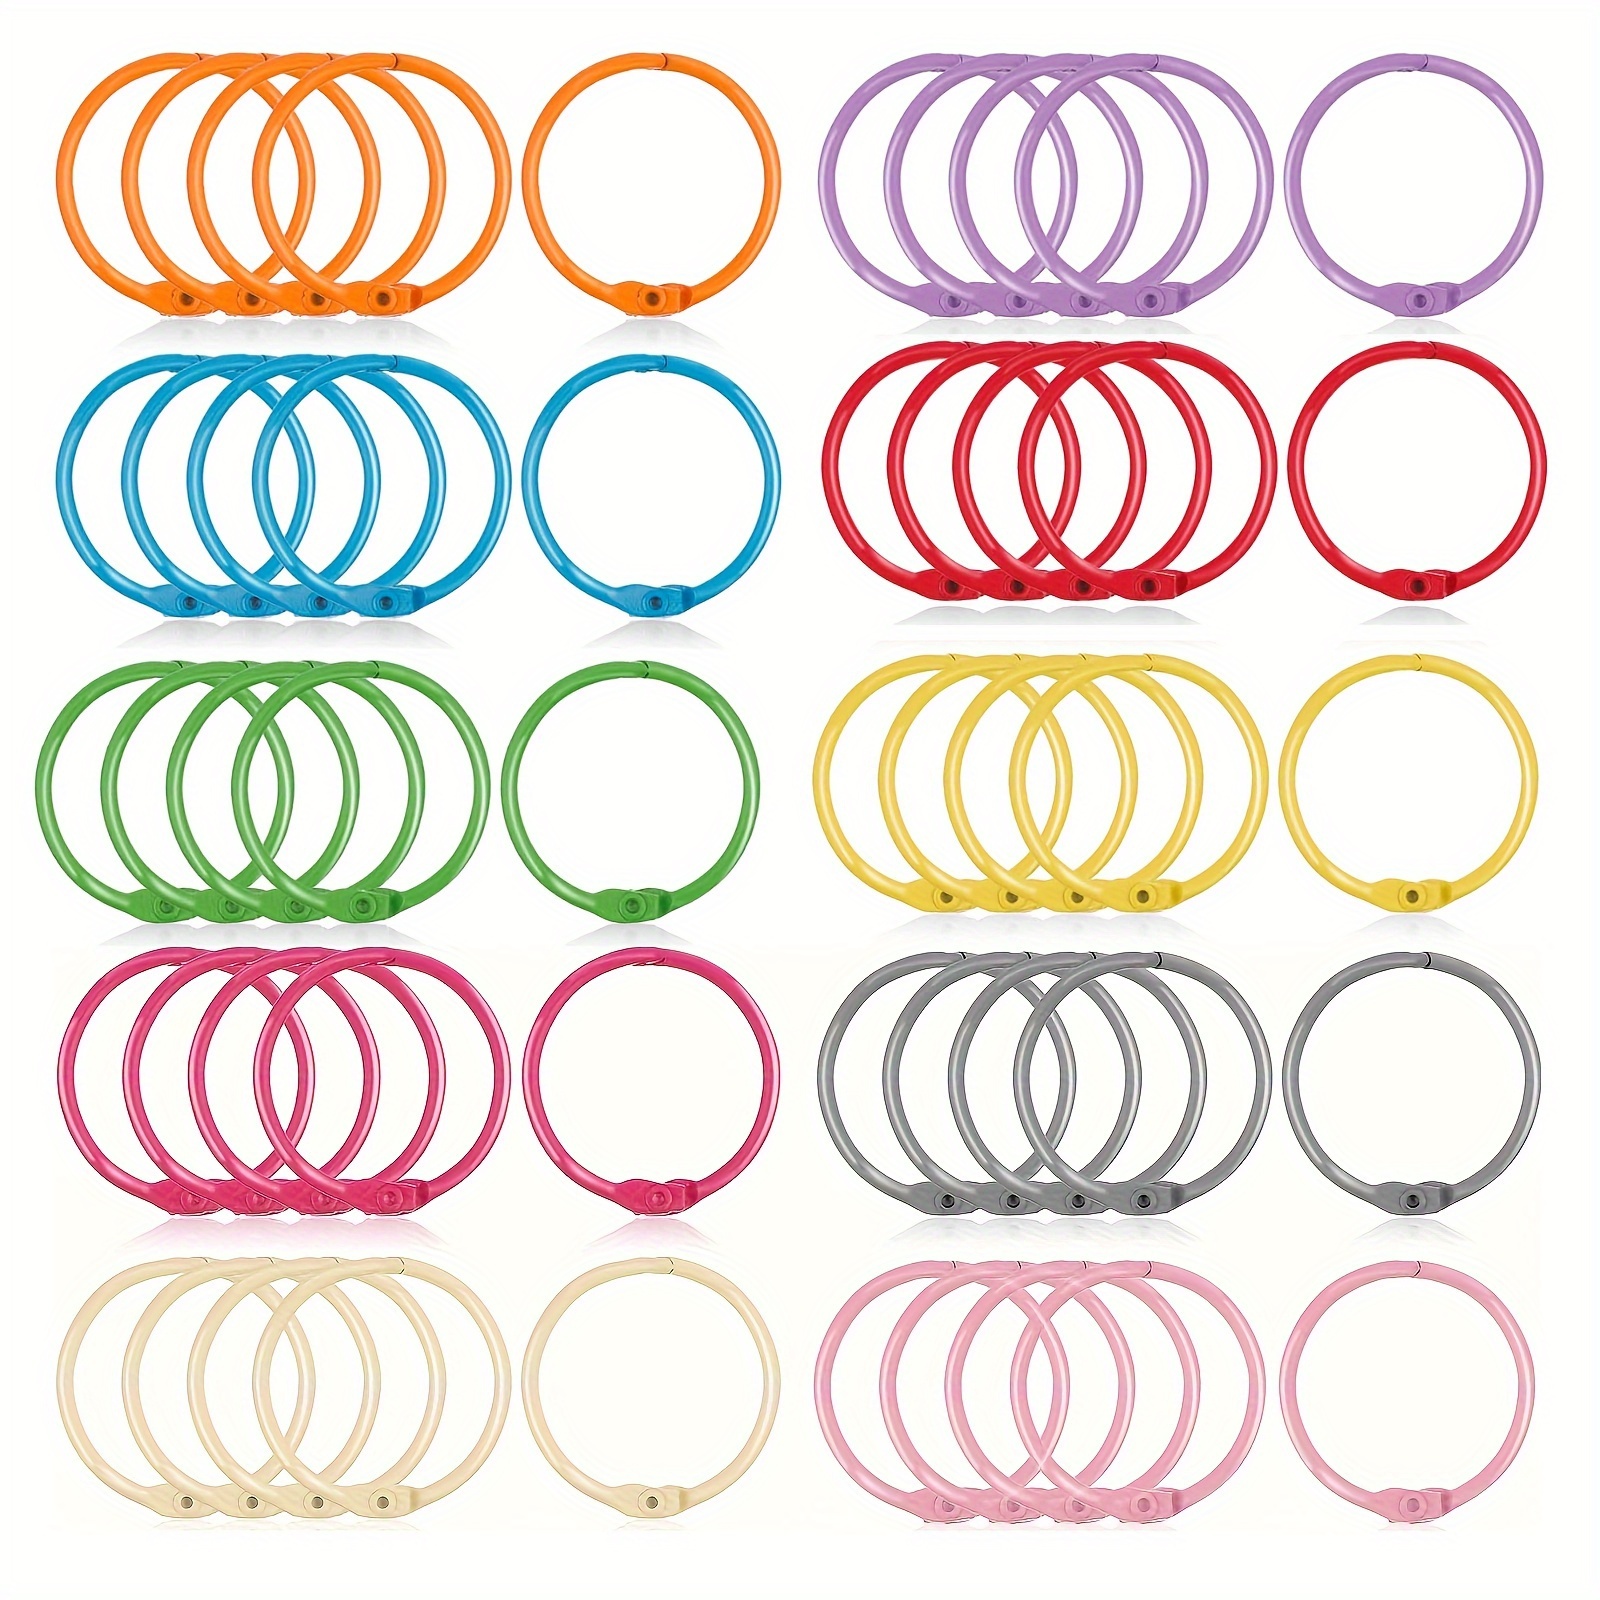 

50pcs Metal Binder Ring Colorful Book Ring, Keychain 30mm1.5 Inch 10 Colors